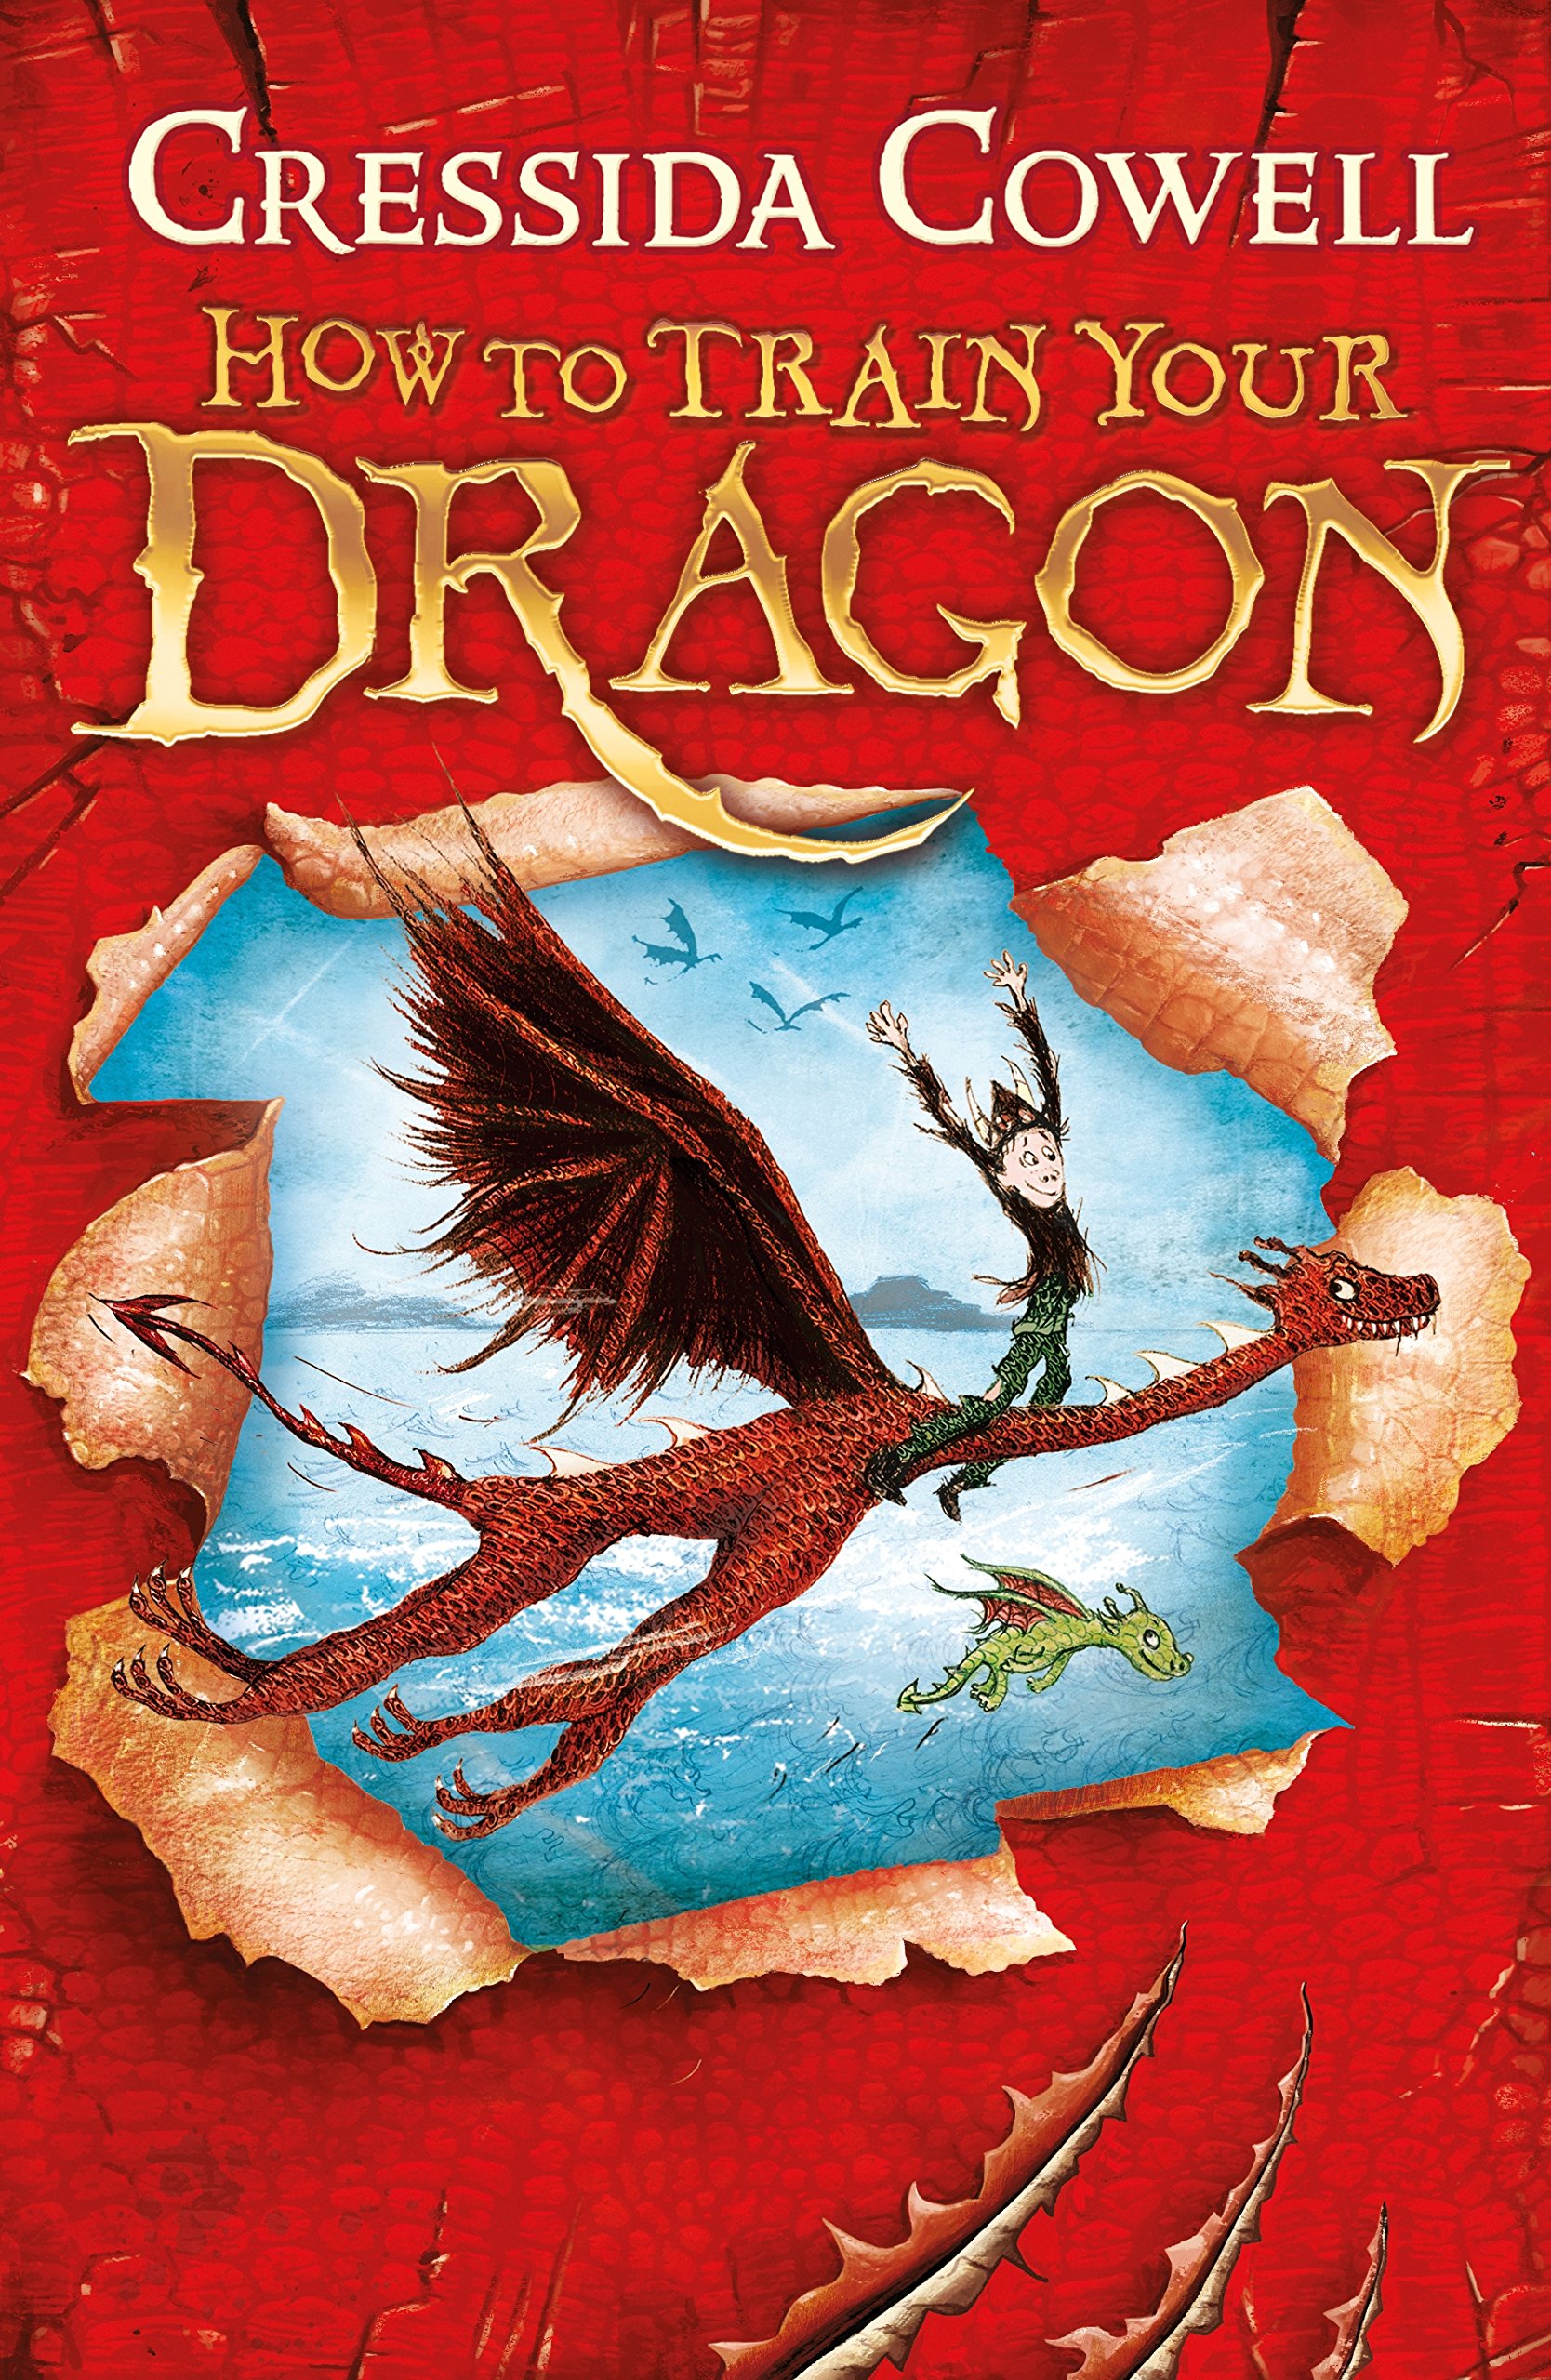 How to Train Your Dragon - listen book free online